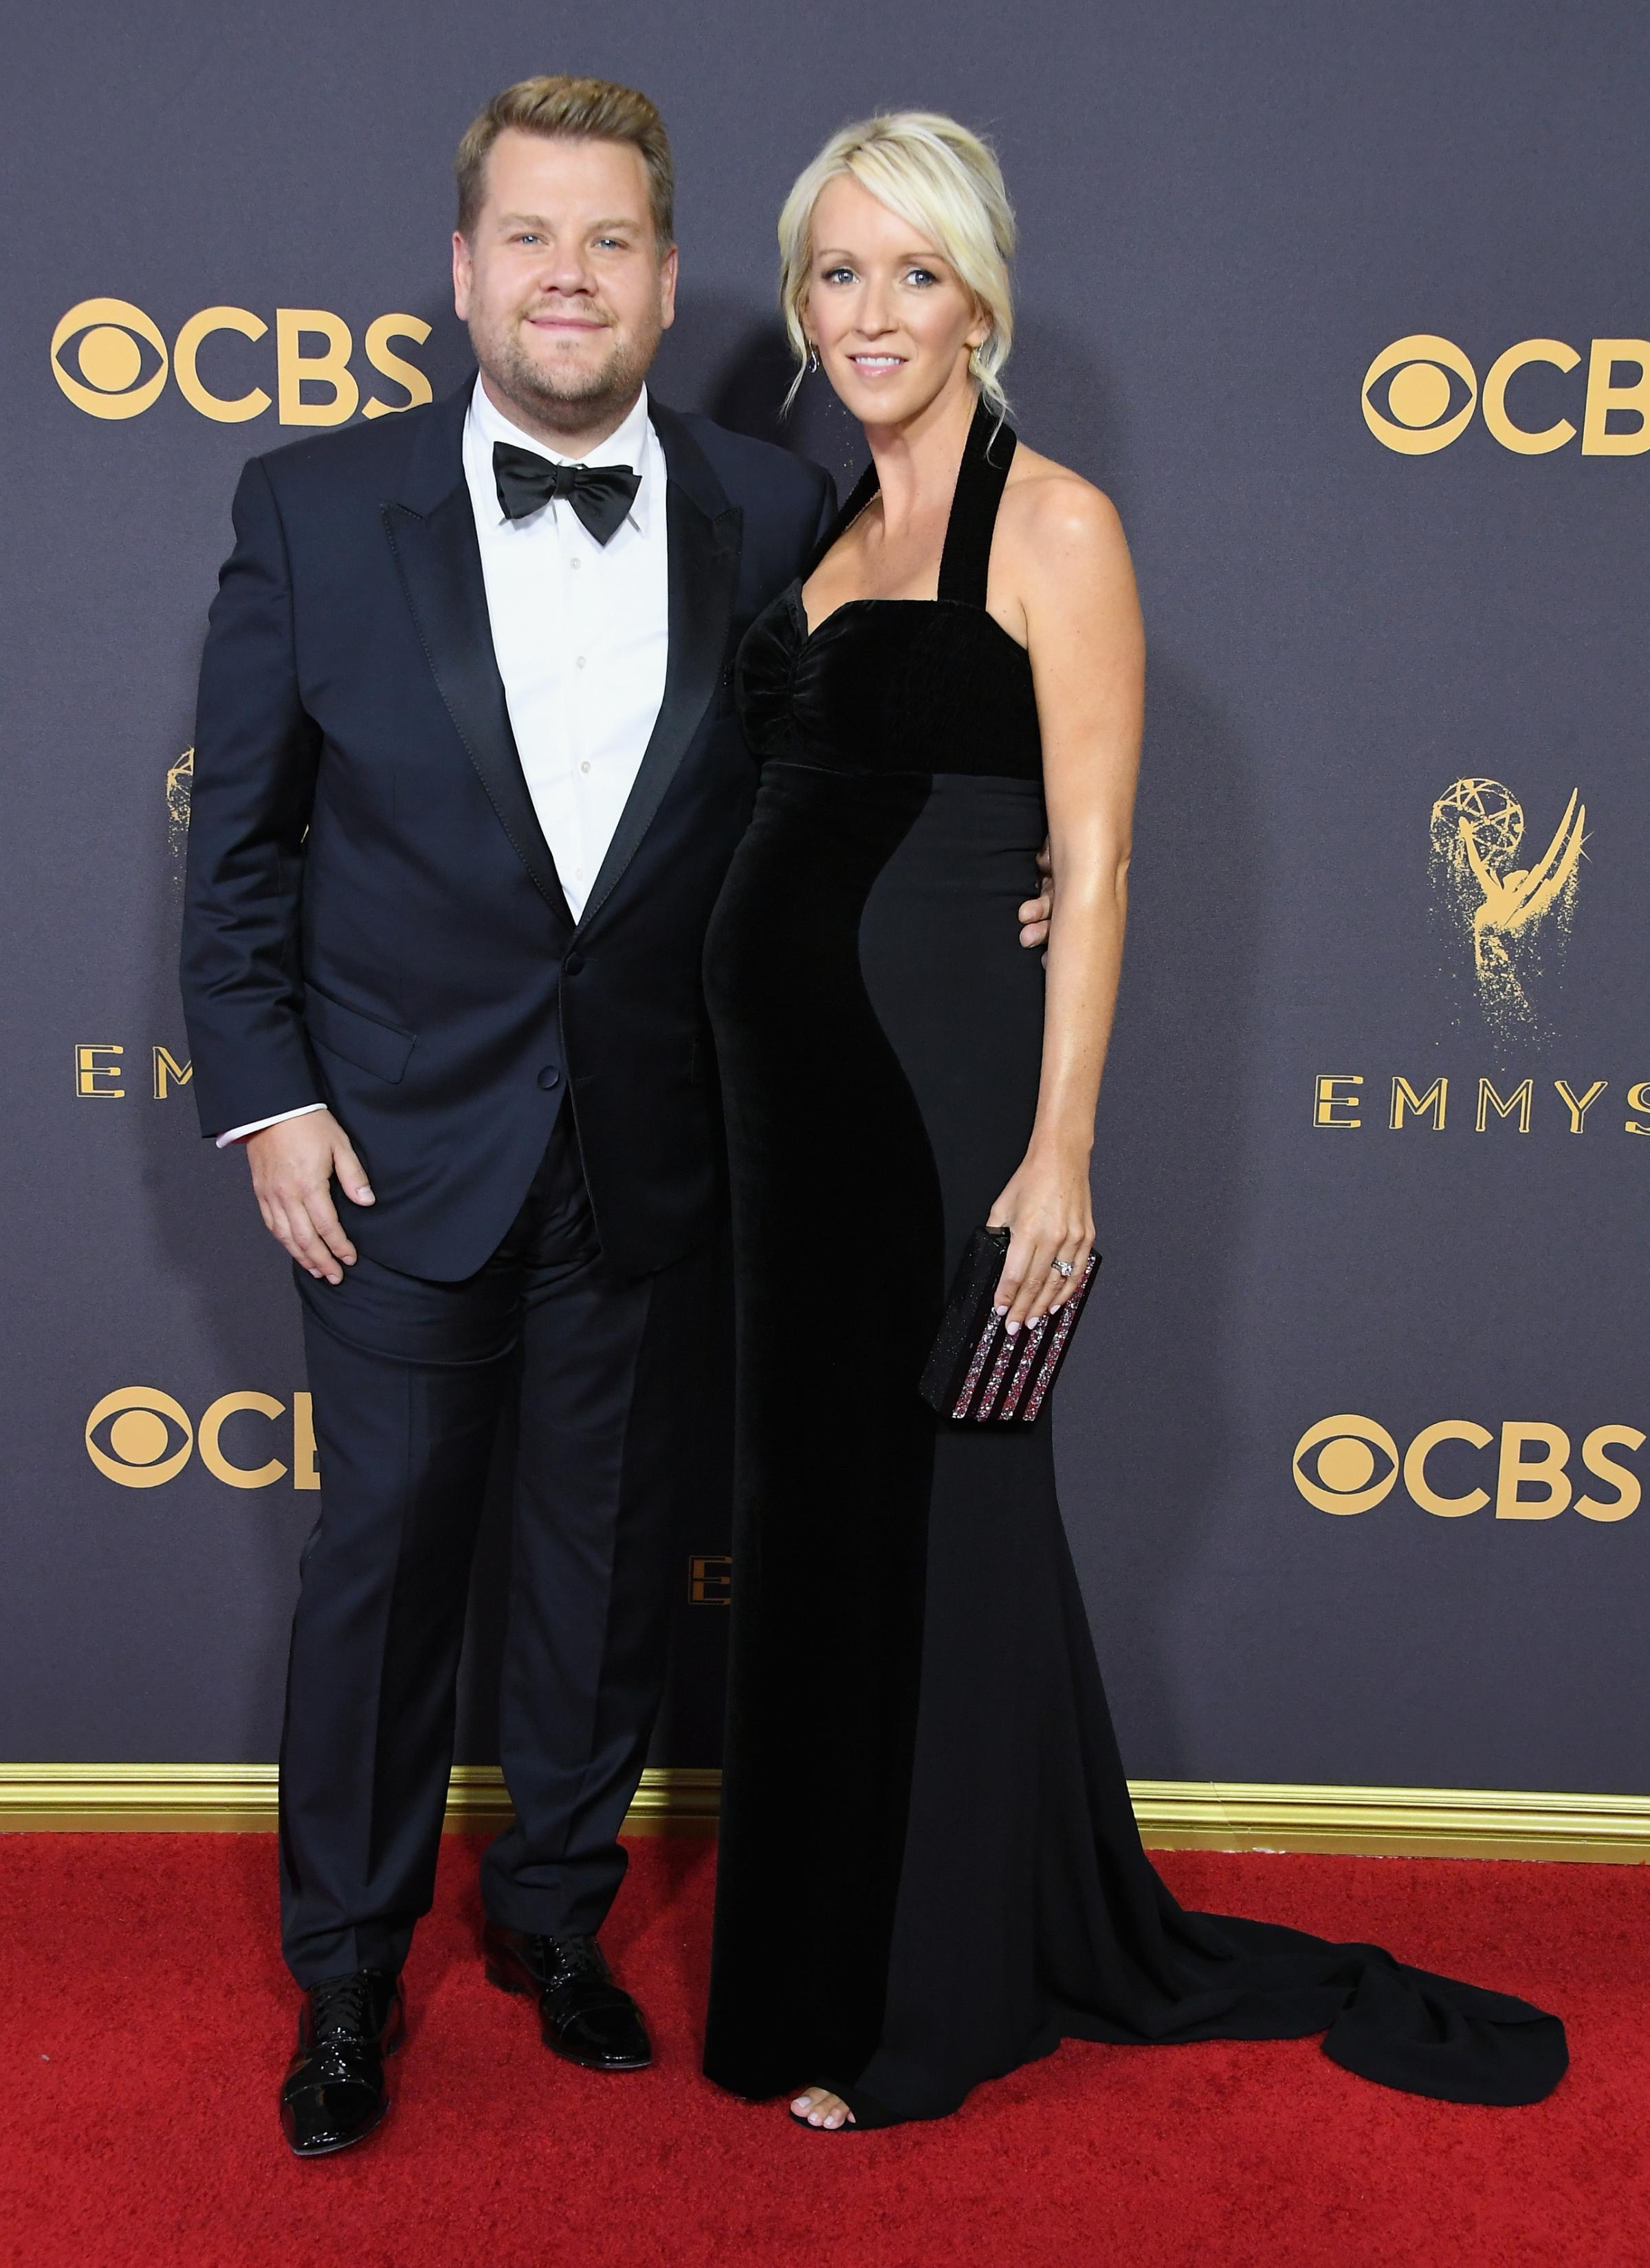 TV personality James Corden (L) and Julia Carey attend the 69th Annual Primetime Emmy Awards at Microsoft Theater on September 17, 2017 in Los Angeles, California.